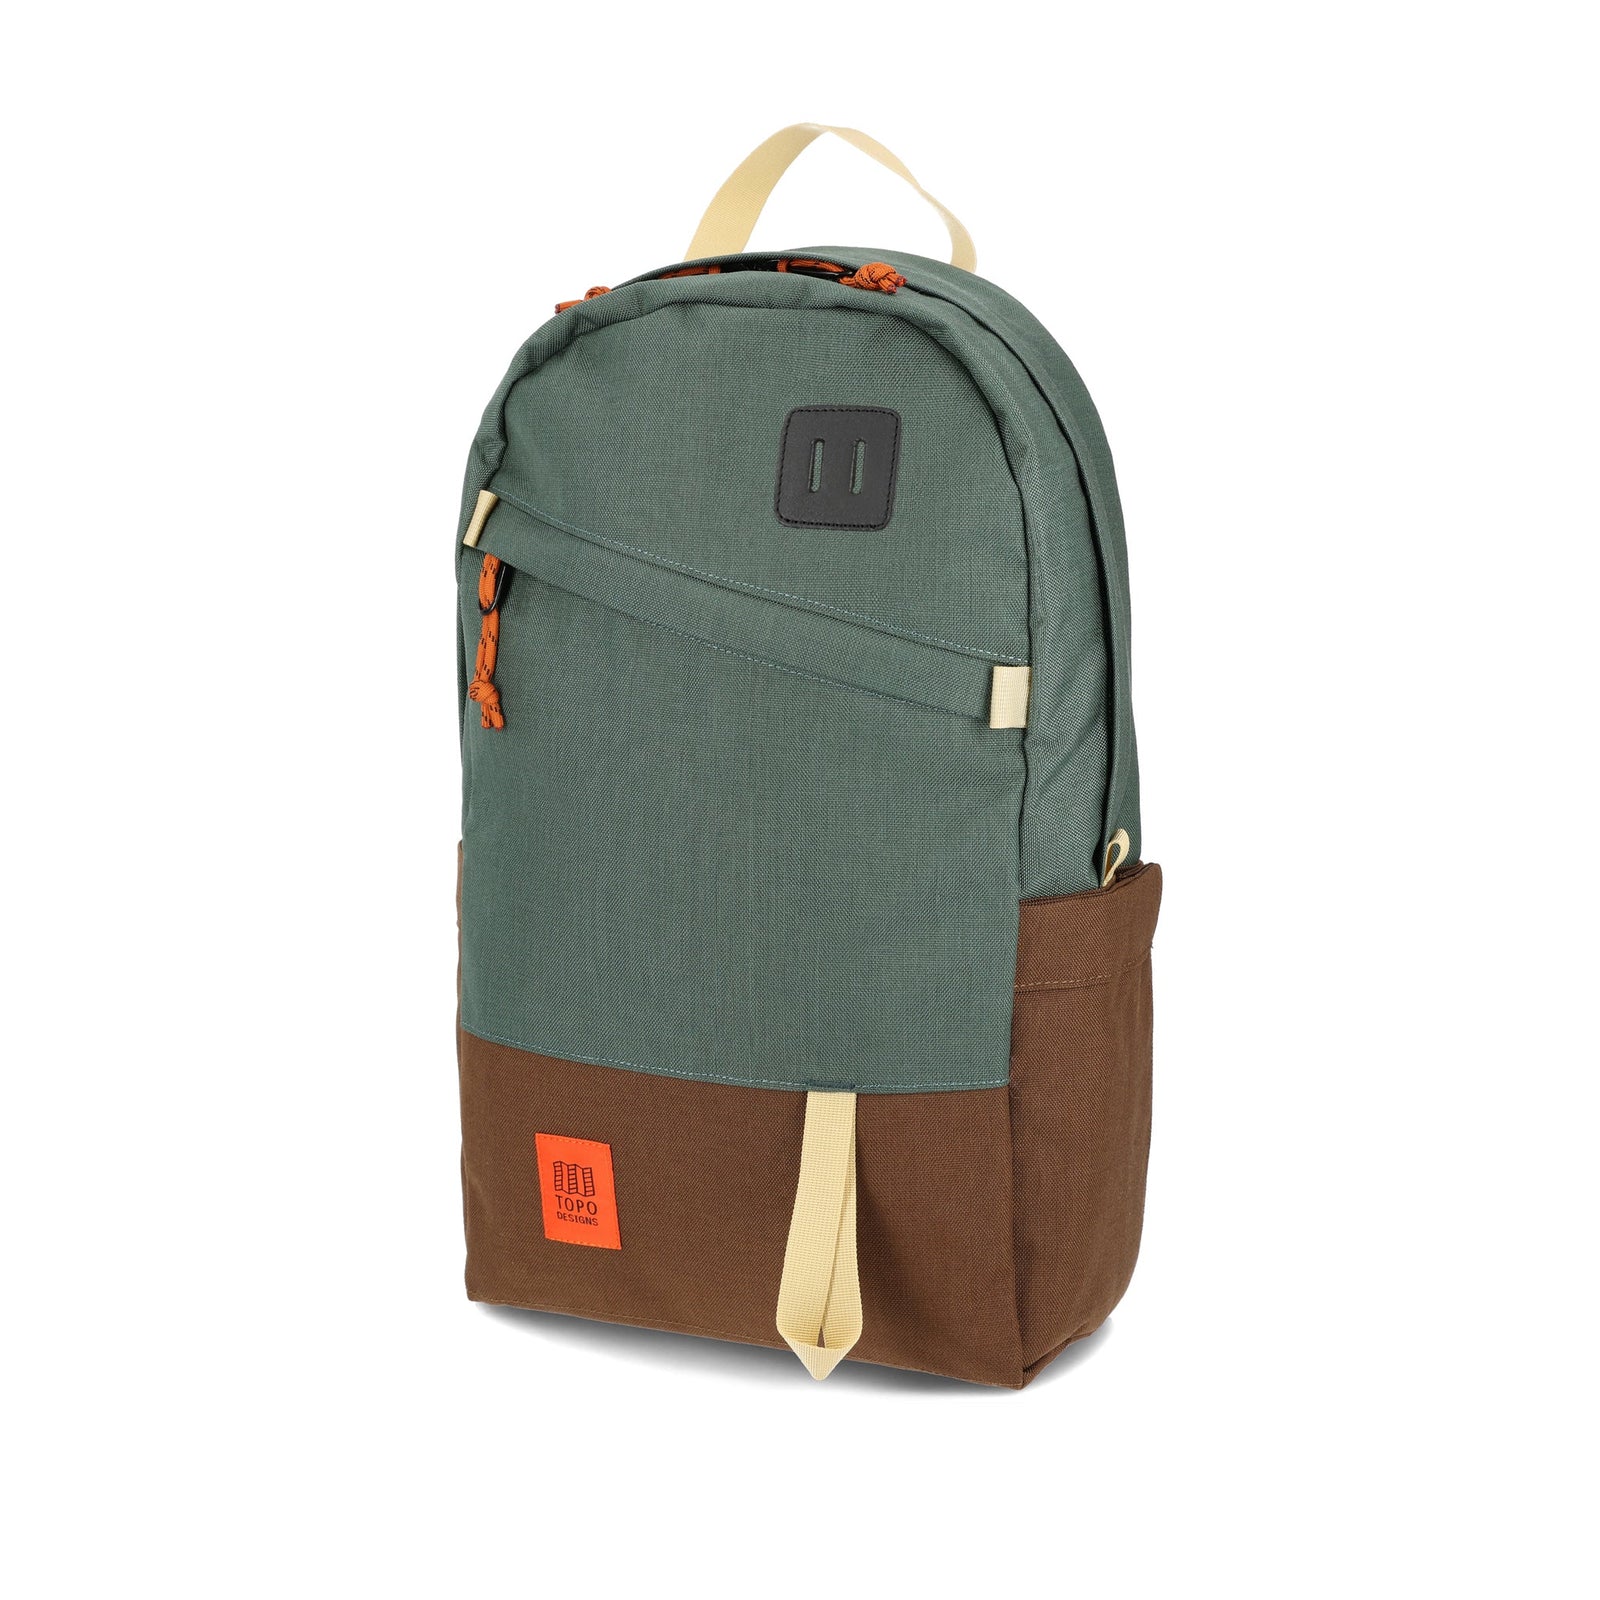 Topo Designs Daypack Classic 100% recycled nylon laptop backpack for work or school in "Forest / Cocoa" green brown